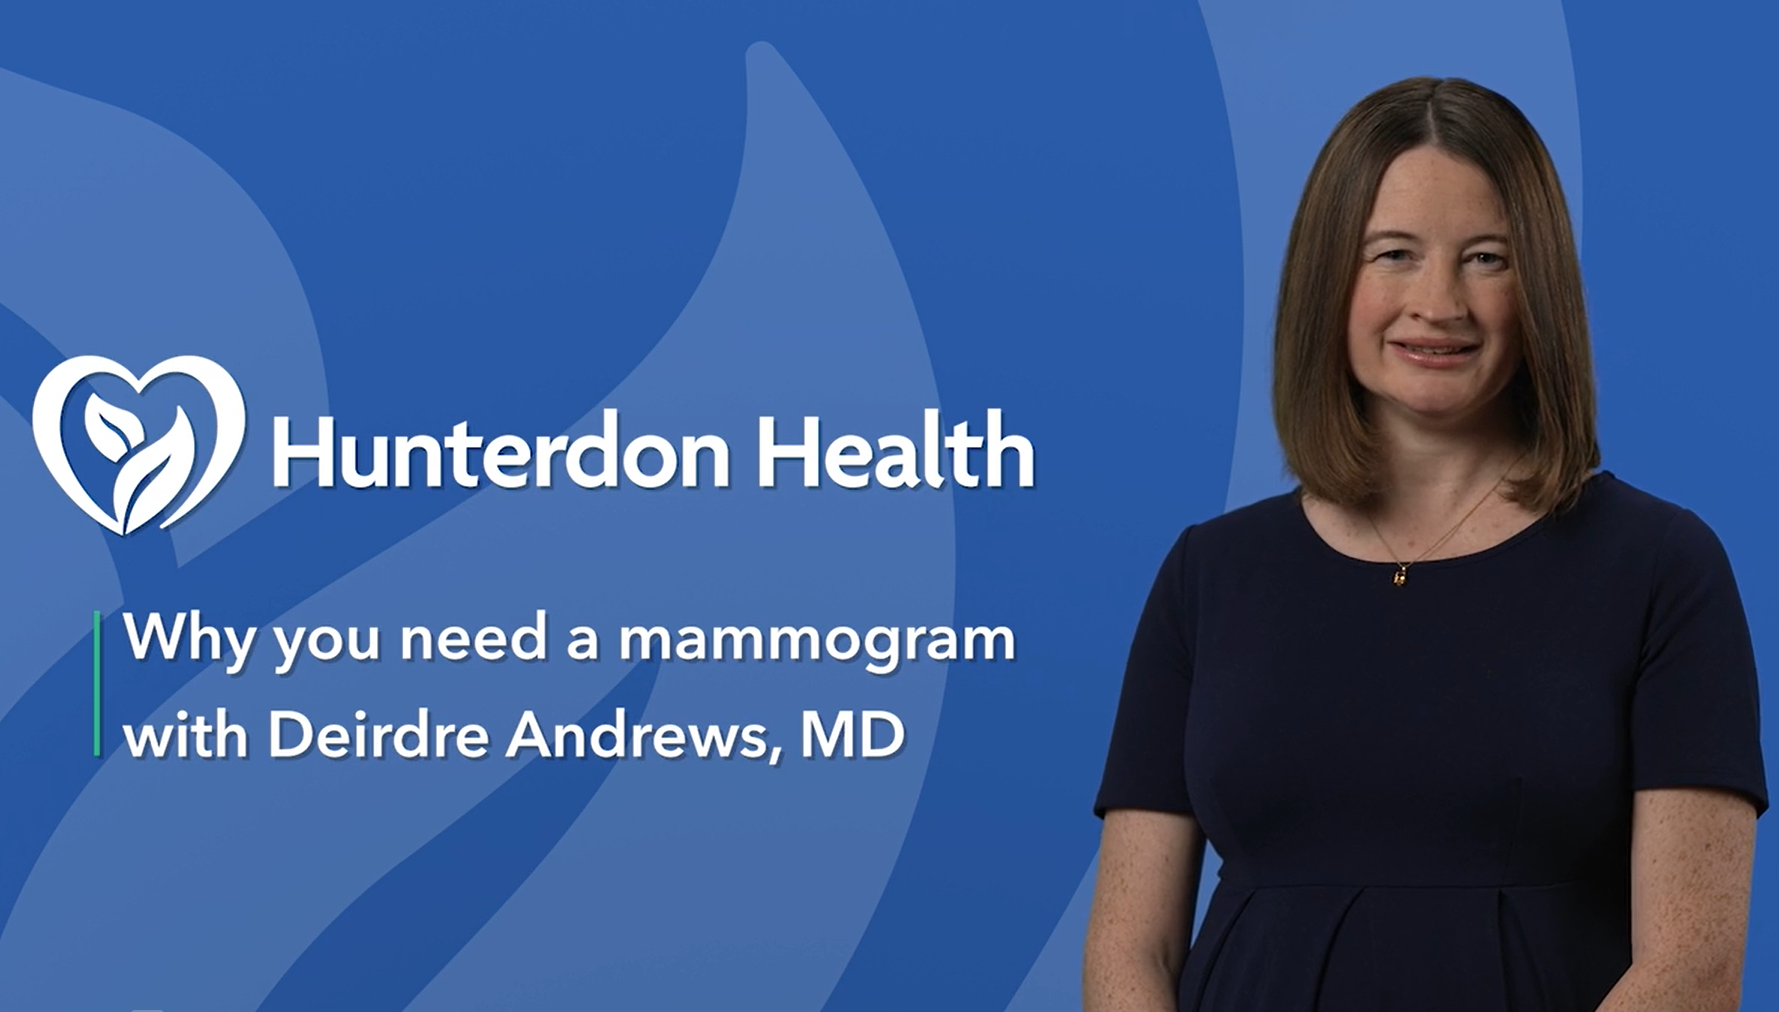 Mammogram Video with Dr. Andrews